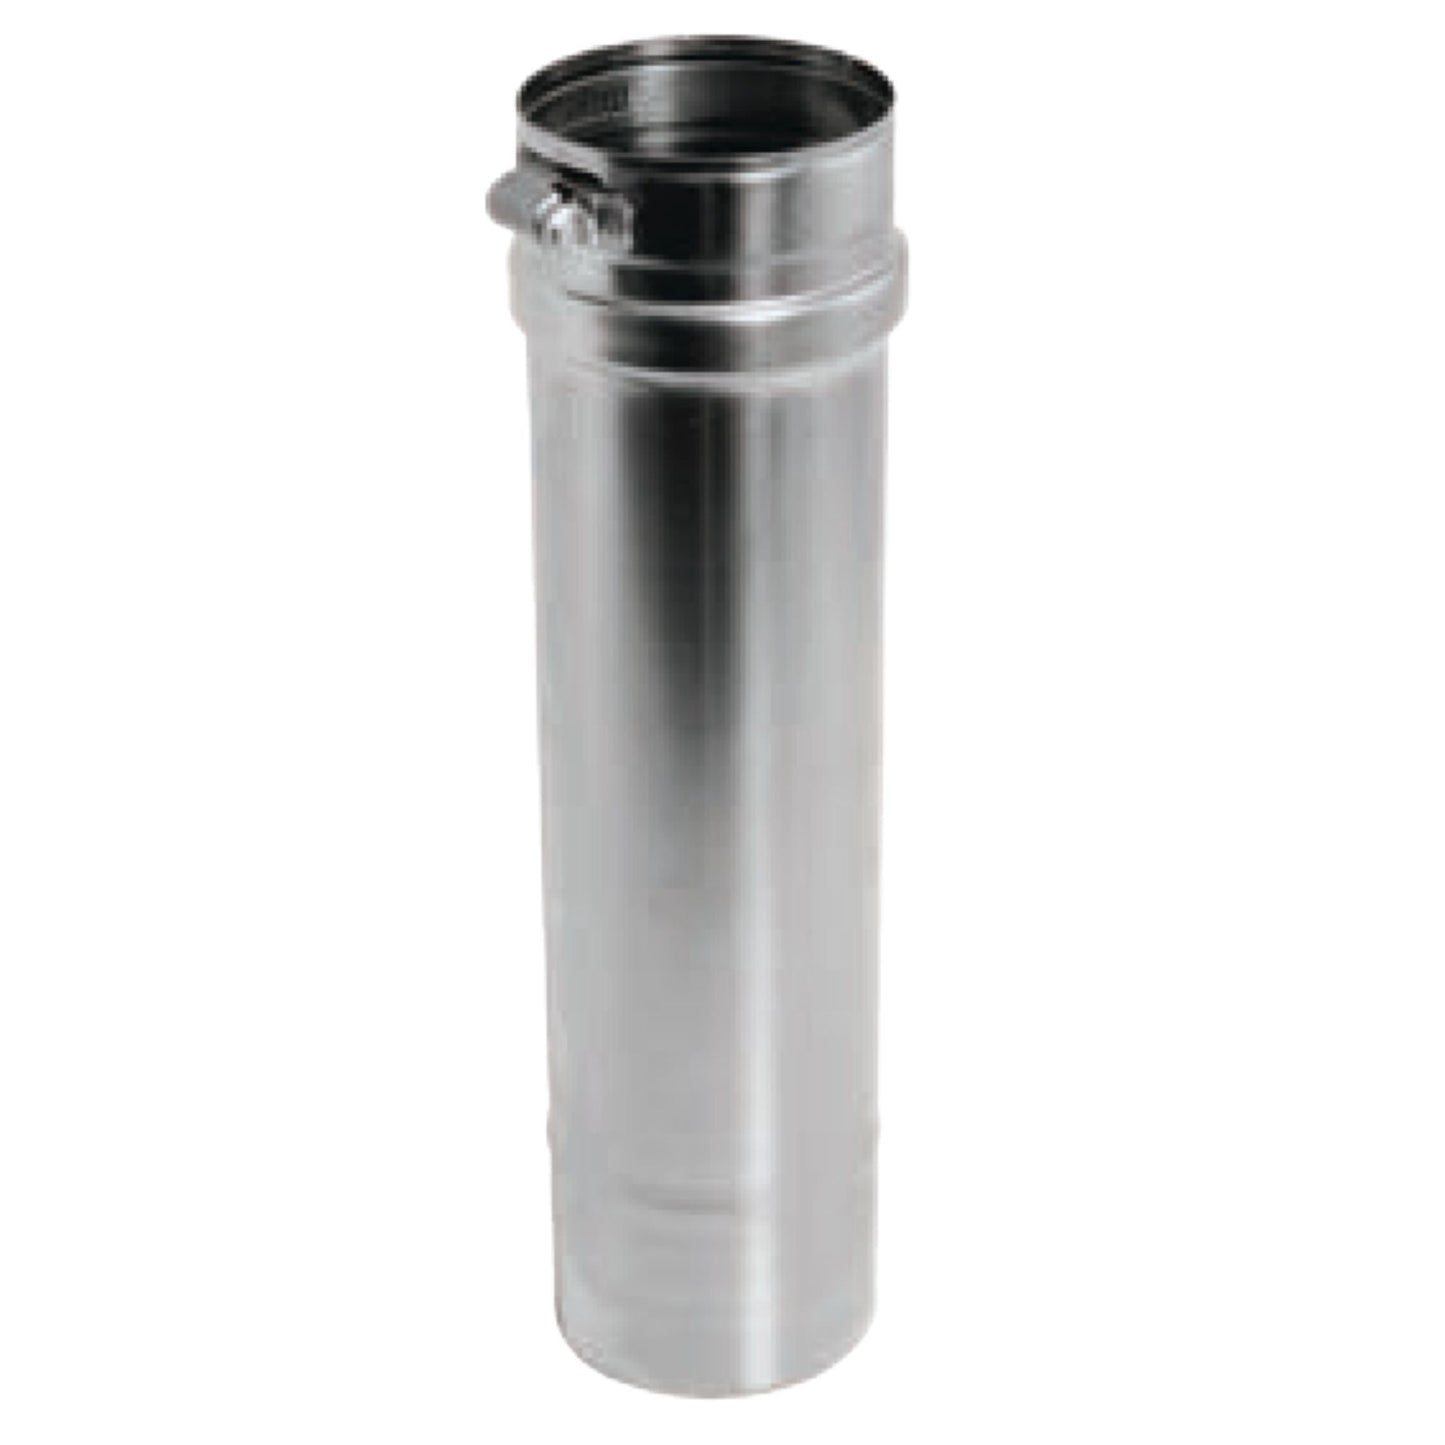 DuraVent FasNSeal 5" x 18" 29-4C Stainless Steel Vent Length